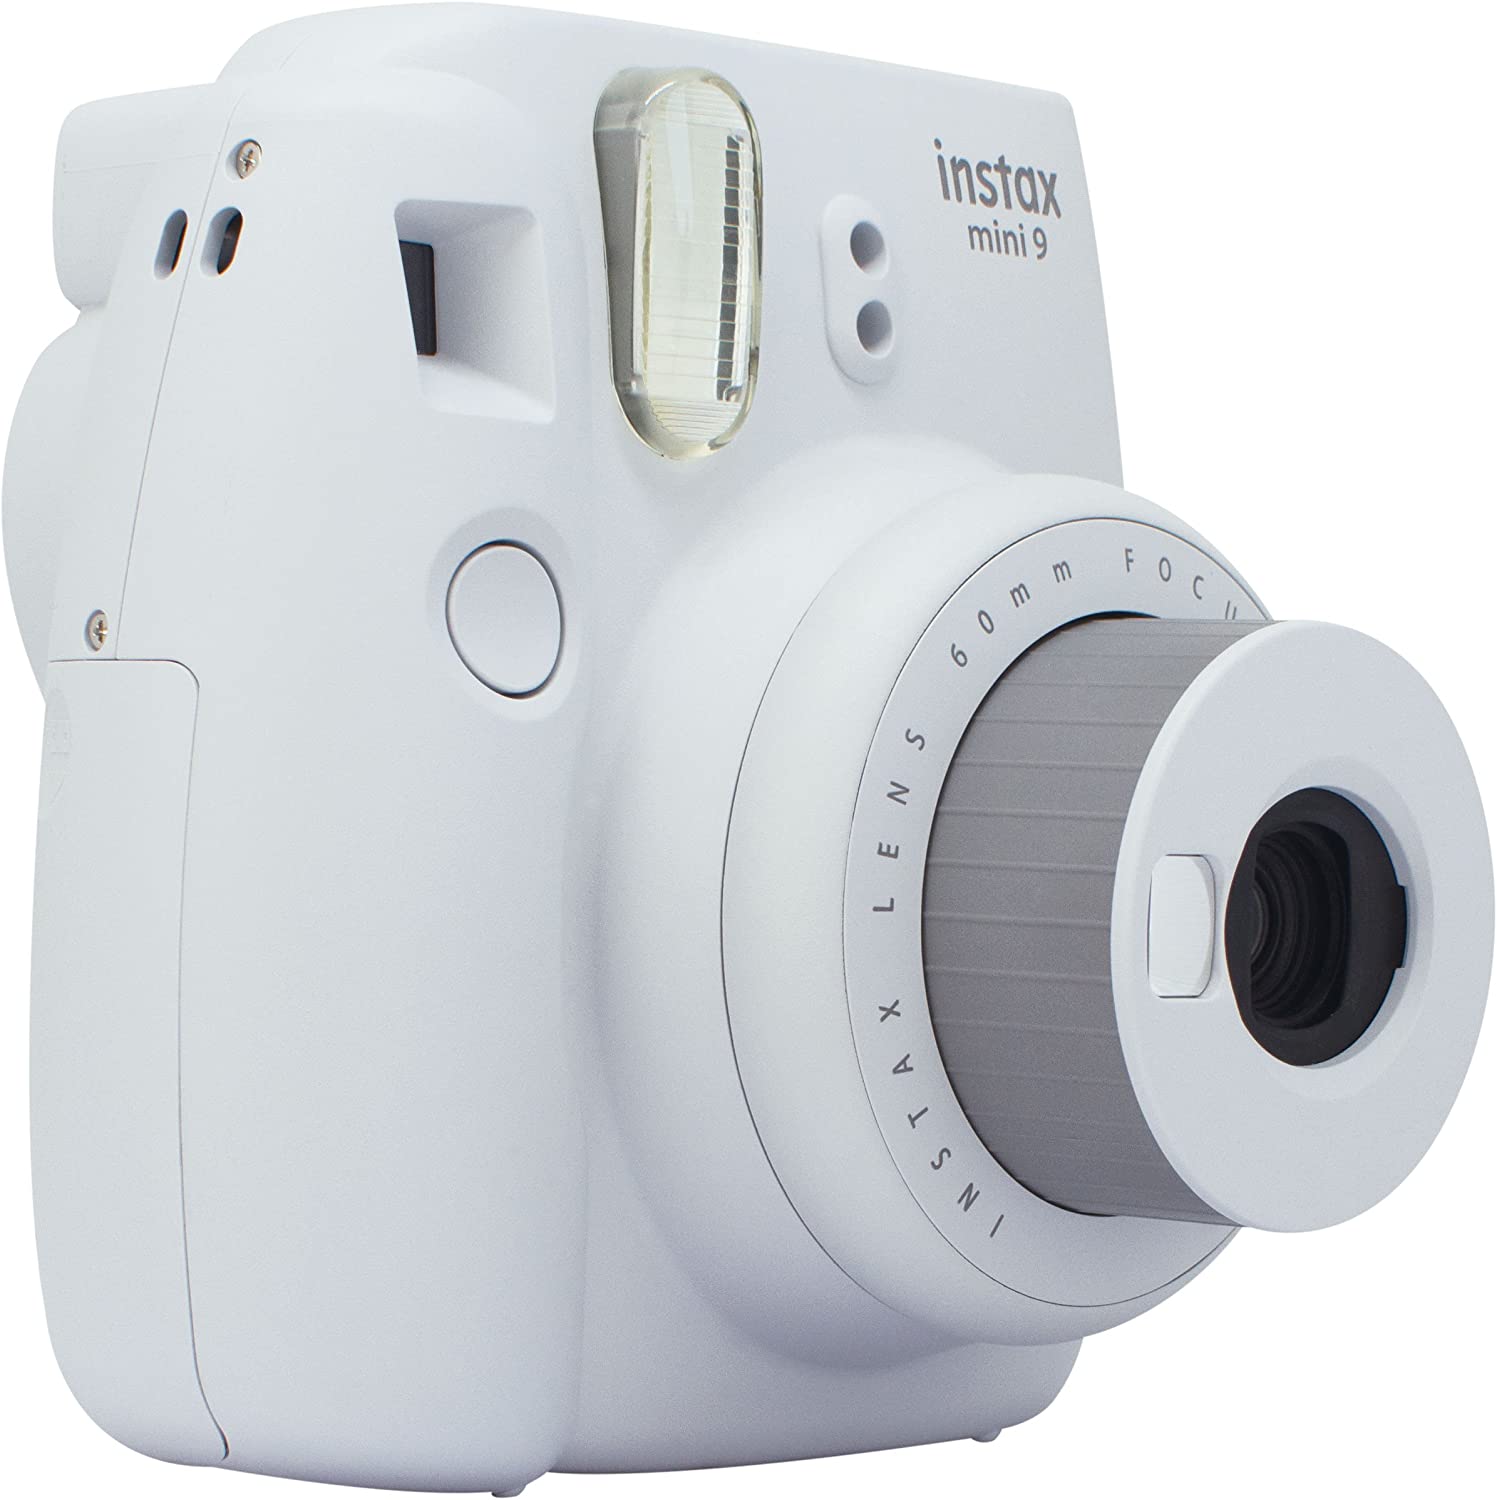 Fujifilm Instax Mini 9 Instant Camera with Built-In Flash & Hand Strap, Smoky White